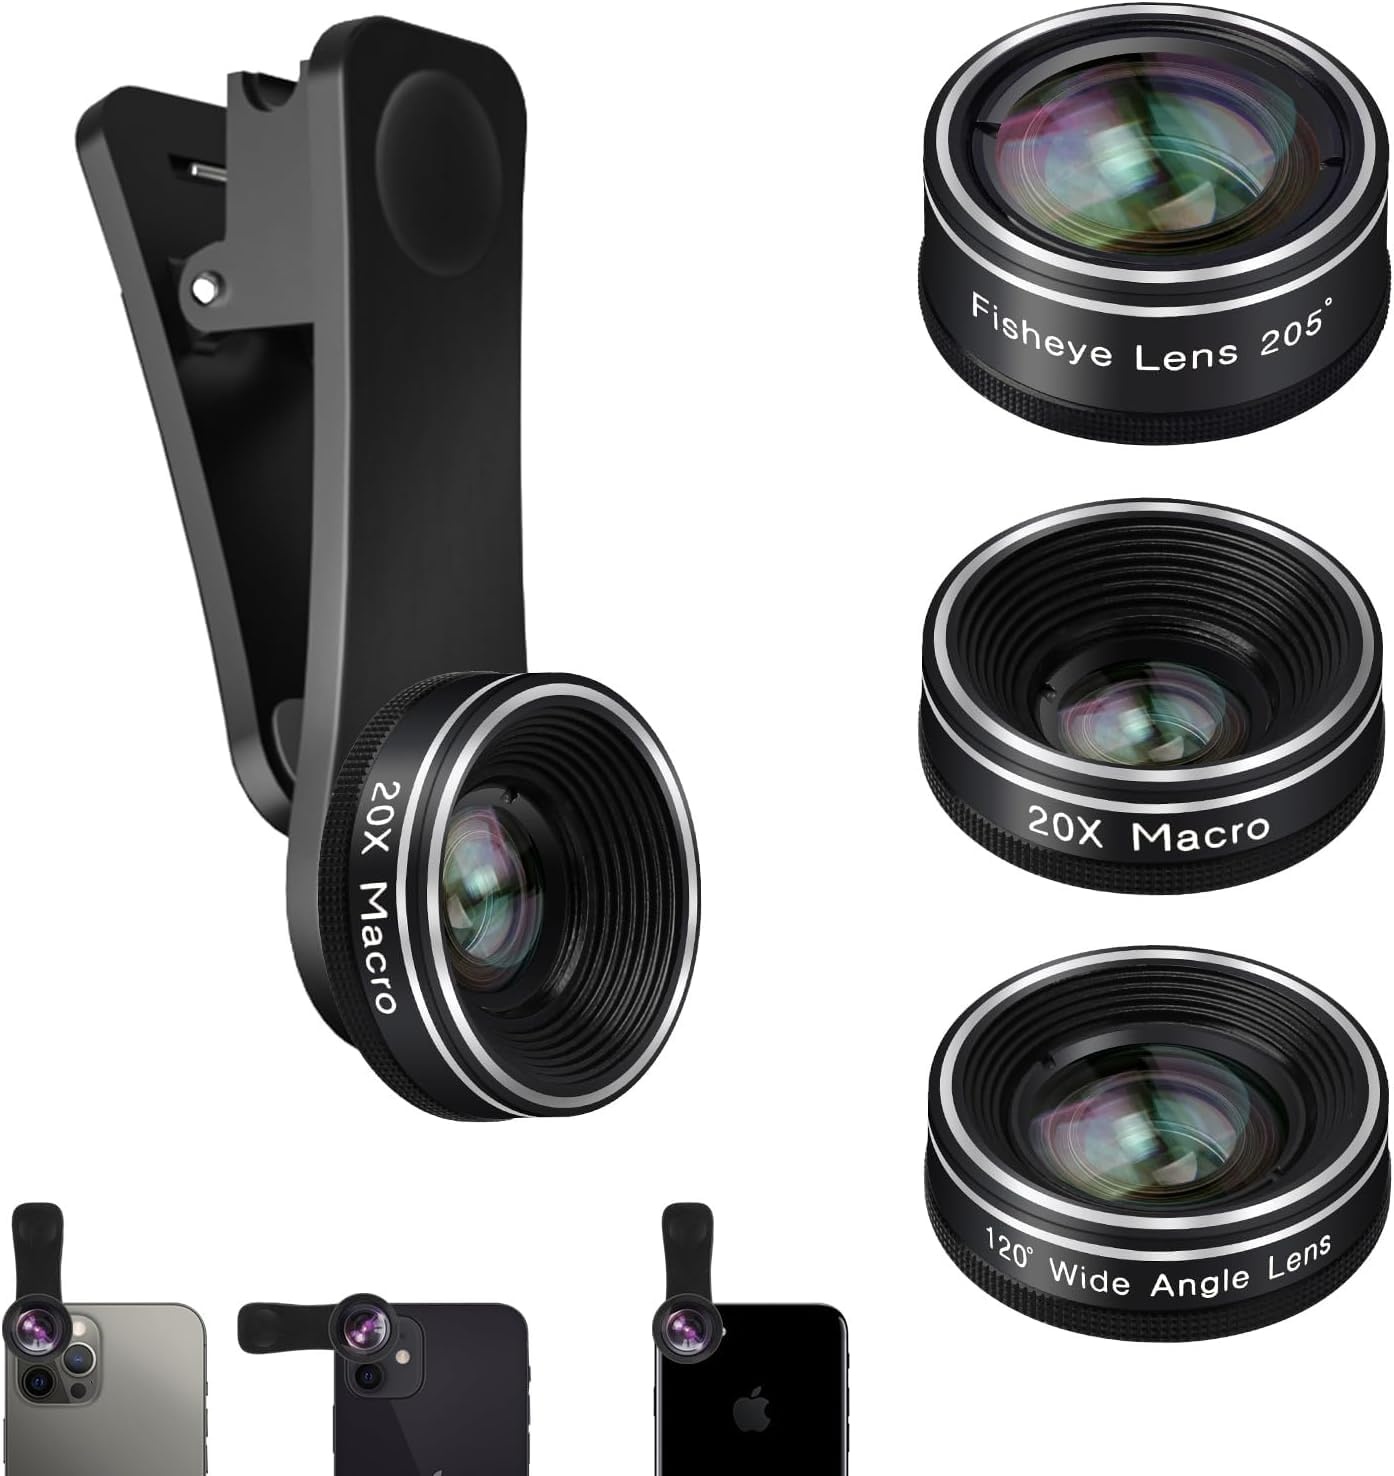 Mocalaca Phone Camera Lens 3 Phone Lens Kit with Refective Mirror, Clip on Fisheye/Macro/Wide Angle Lens Attachment for iPhone 14 13 12 11 Xs X Pro Max Samsung Android Smartphone, MO-MI-3LENS